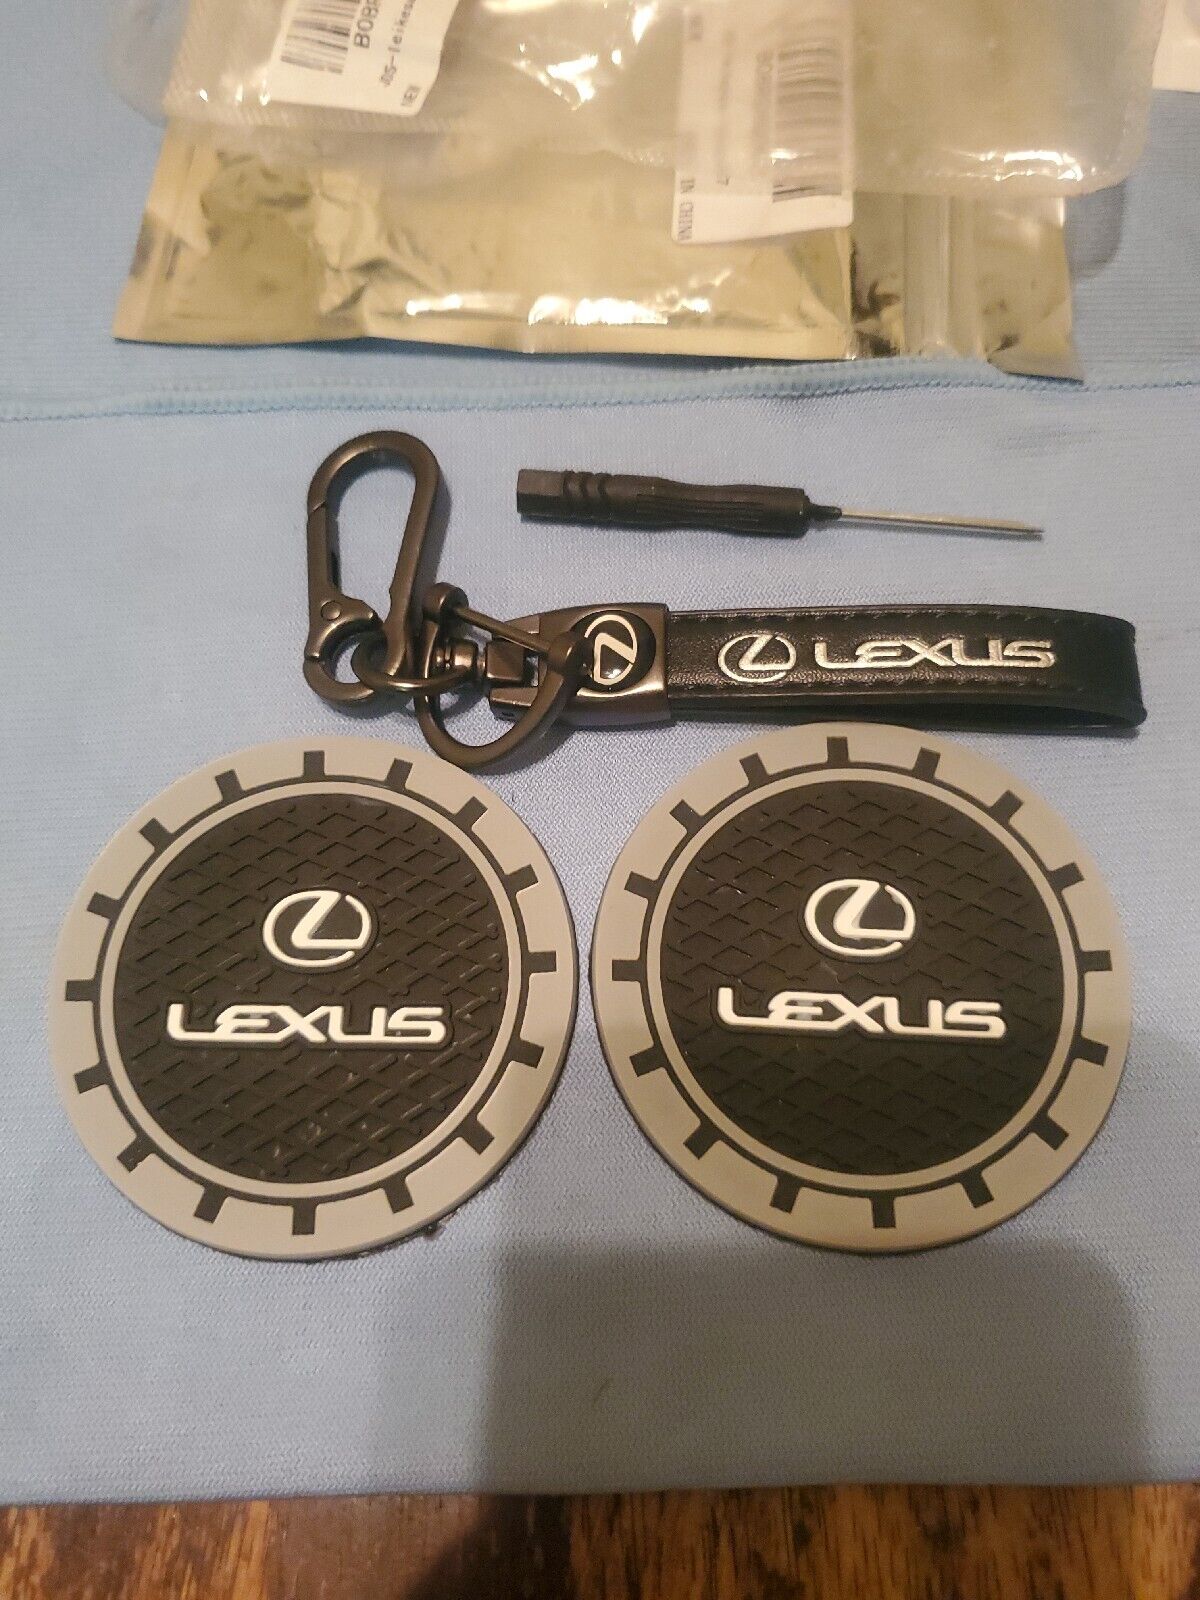 Lexus Genuine Leather Car Keychain & 2 Anti-Slip Coasters For Cup Holders